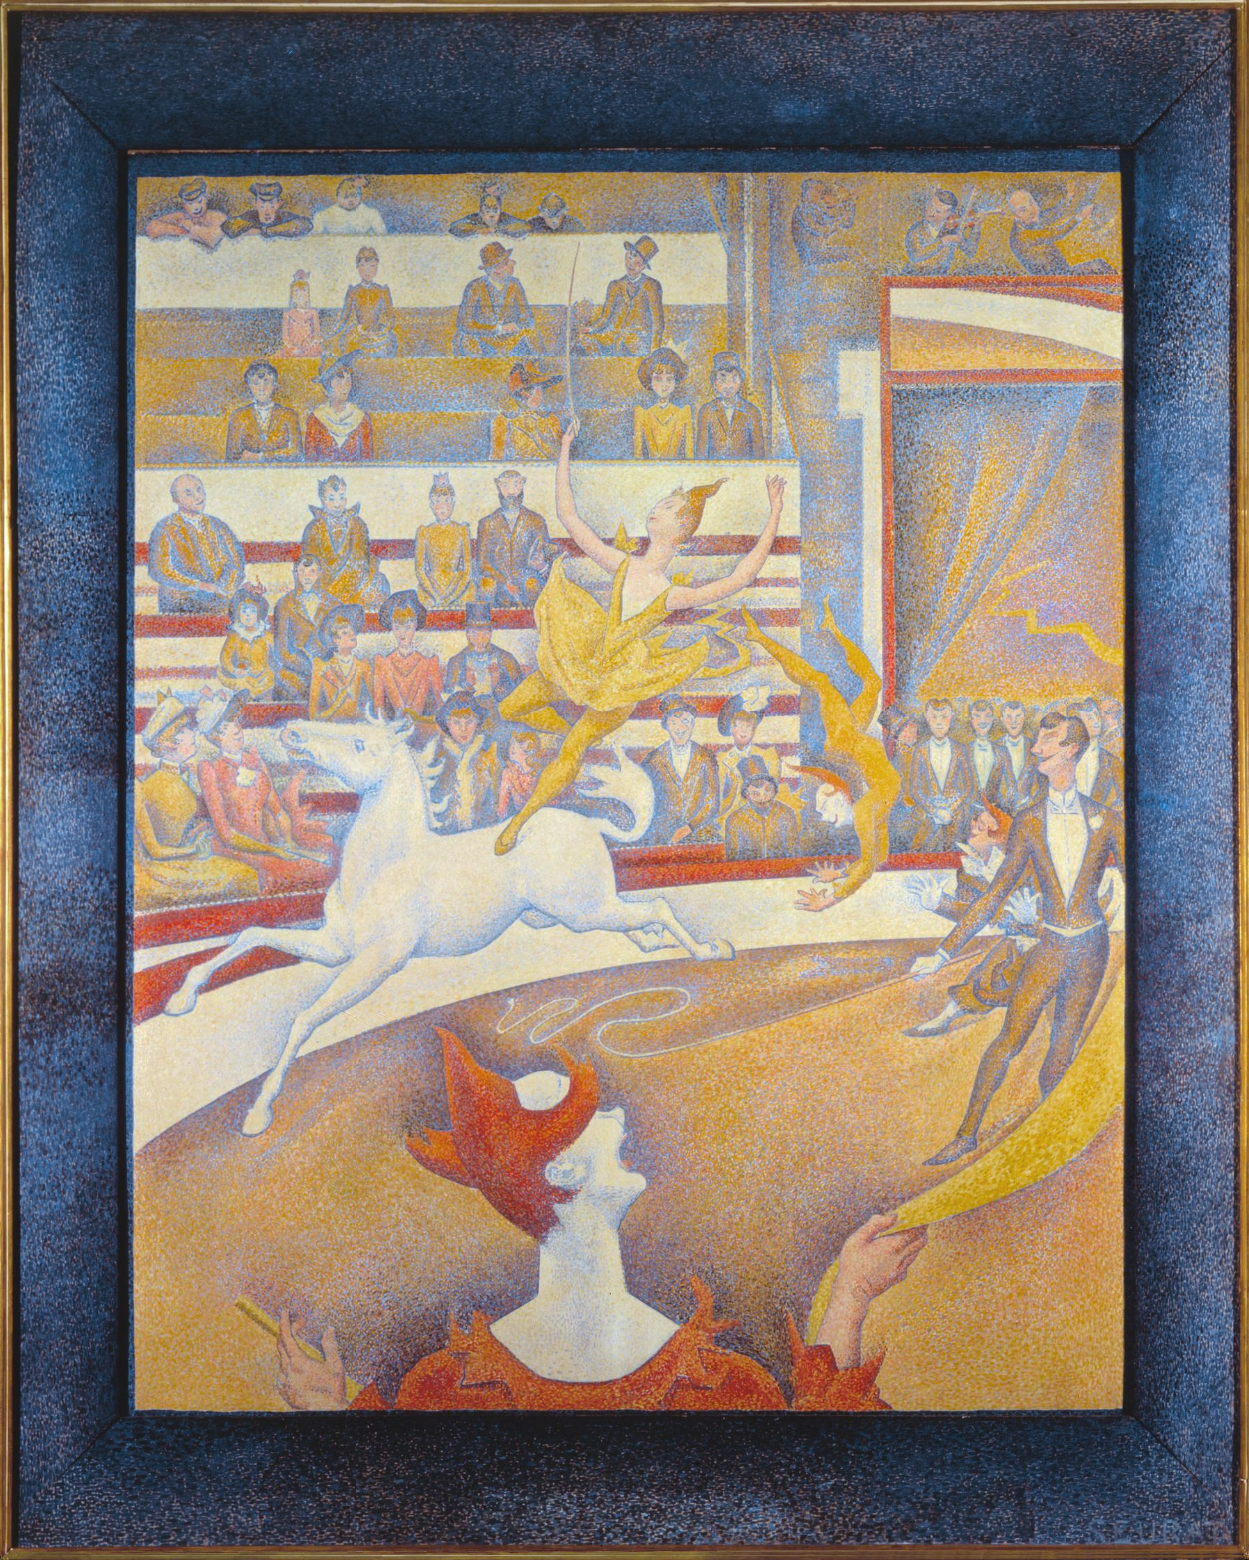 https://upload.wikimedia.org/wikipedia/commons/4/41/Georges_Seurat%2C_1891%2C_Le_Cirque_%28The_Circus%29%2C_oil_on_canvas%2C_185_x_152_cm%2C_Mus%C3%A9e_d%27Orsay.jpg